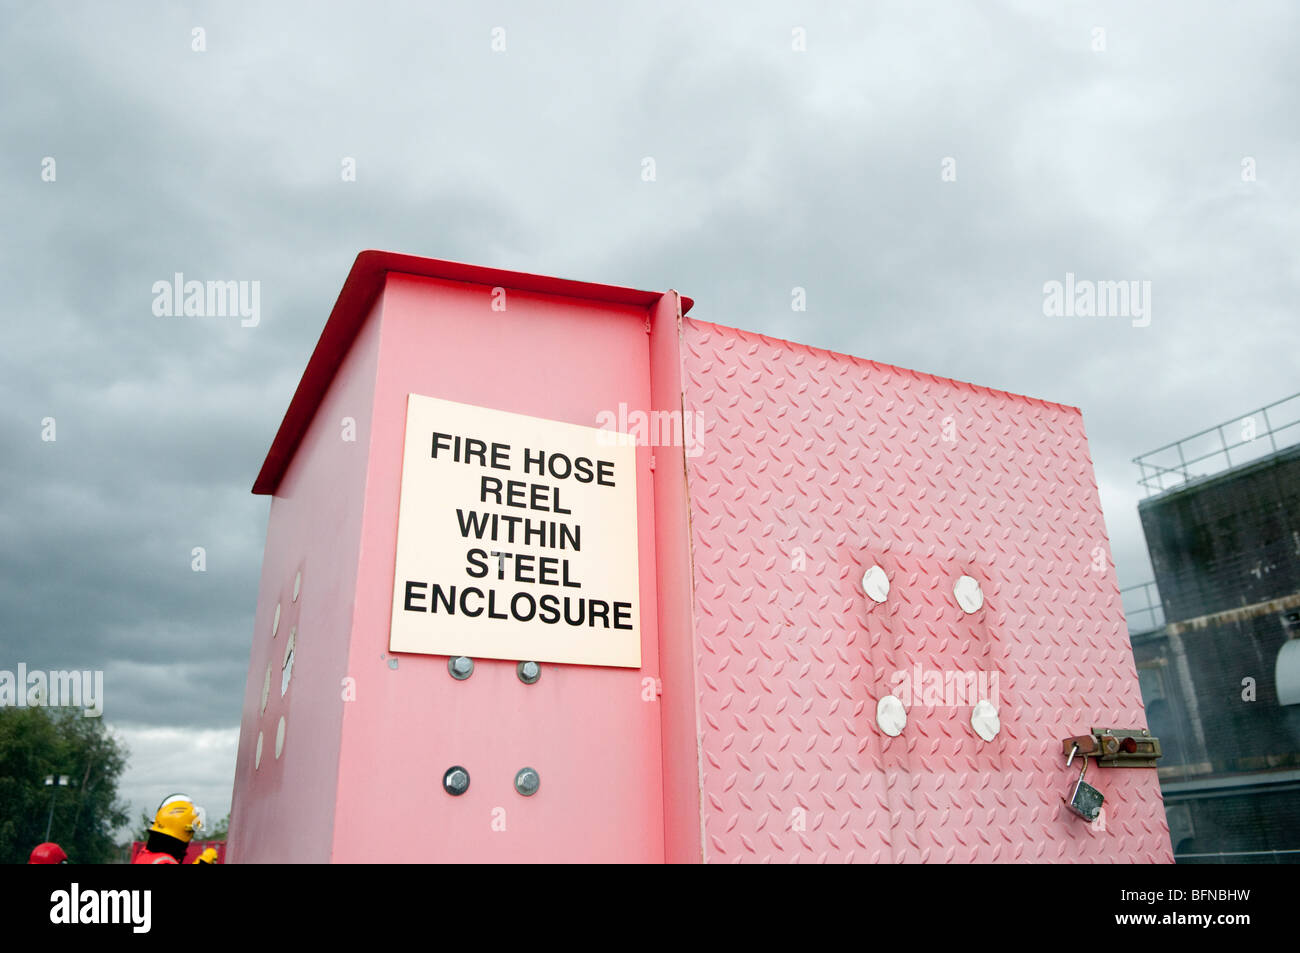 Fire hose reel within steel enclosure Stock Photo